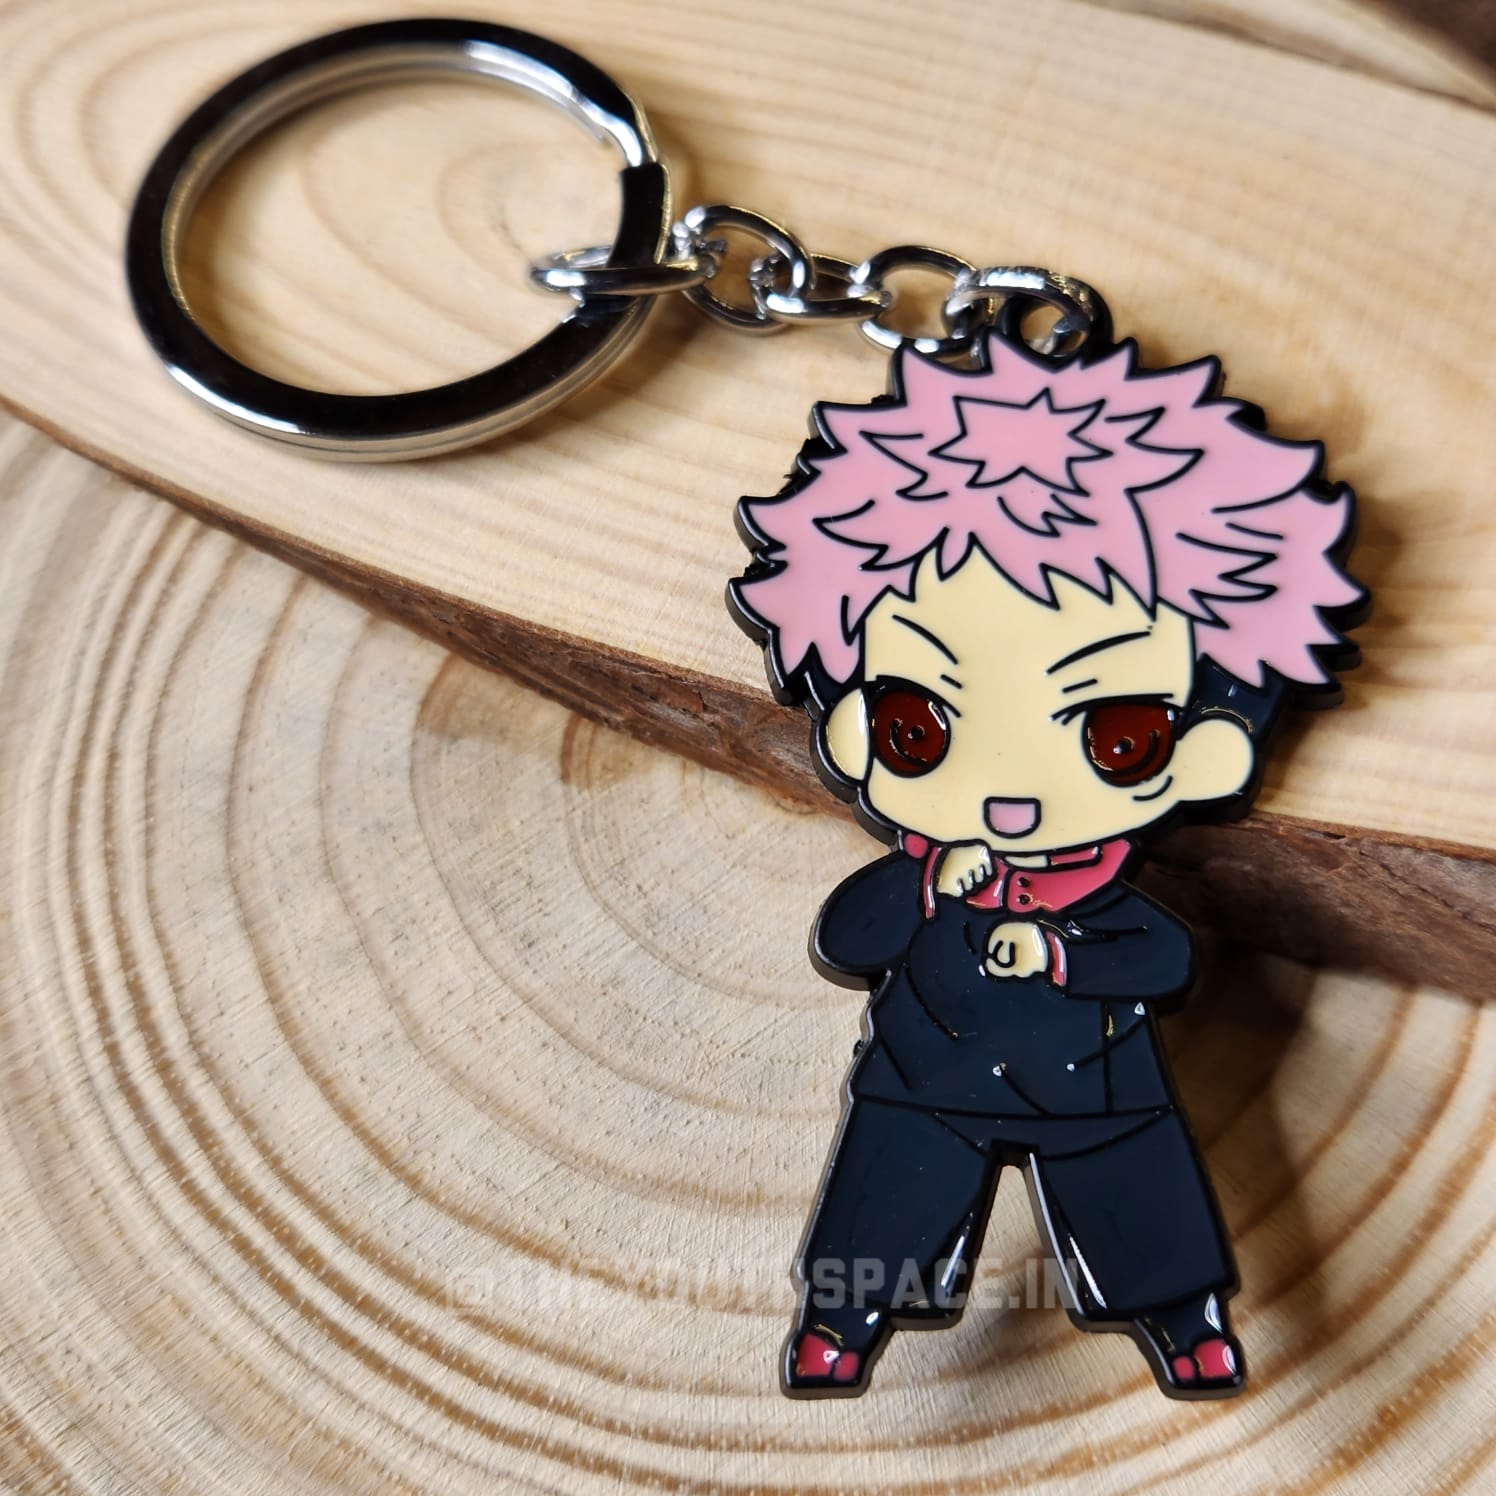 Amazon.com: Wetsynt Anime Cartoon Keychains Novelty Keychain 3D Motion Anime  Key Chains Accessories Anime Gifts for Women Men Men-33DNK-11,(33DNK2-11) :  Everything Else